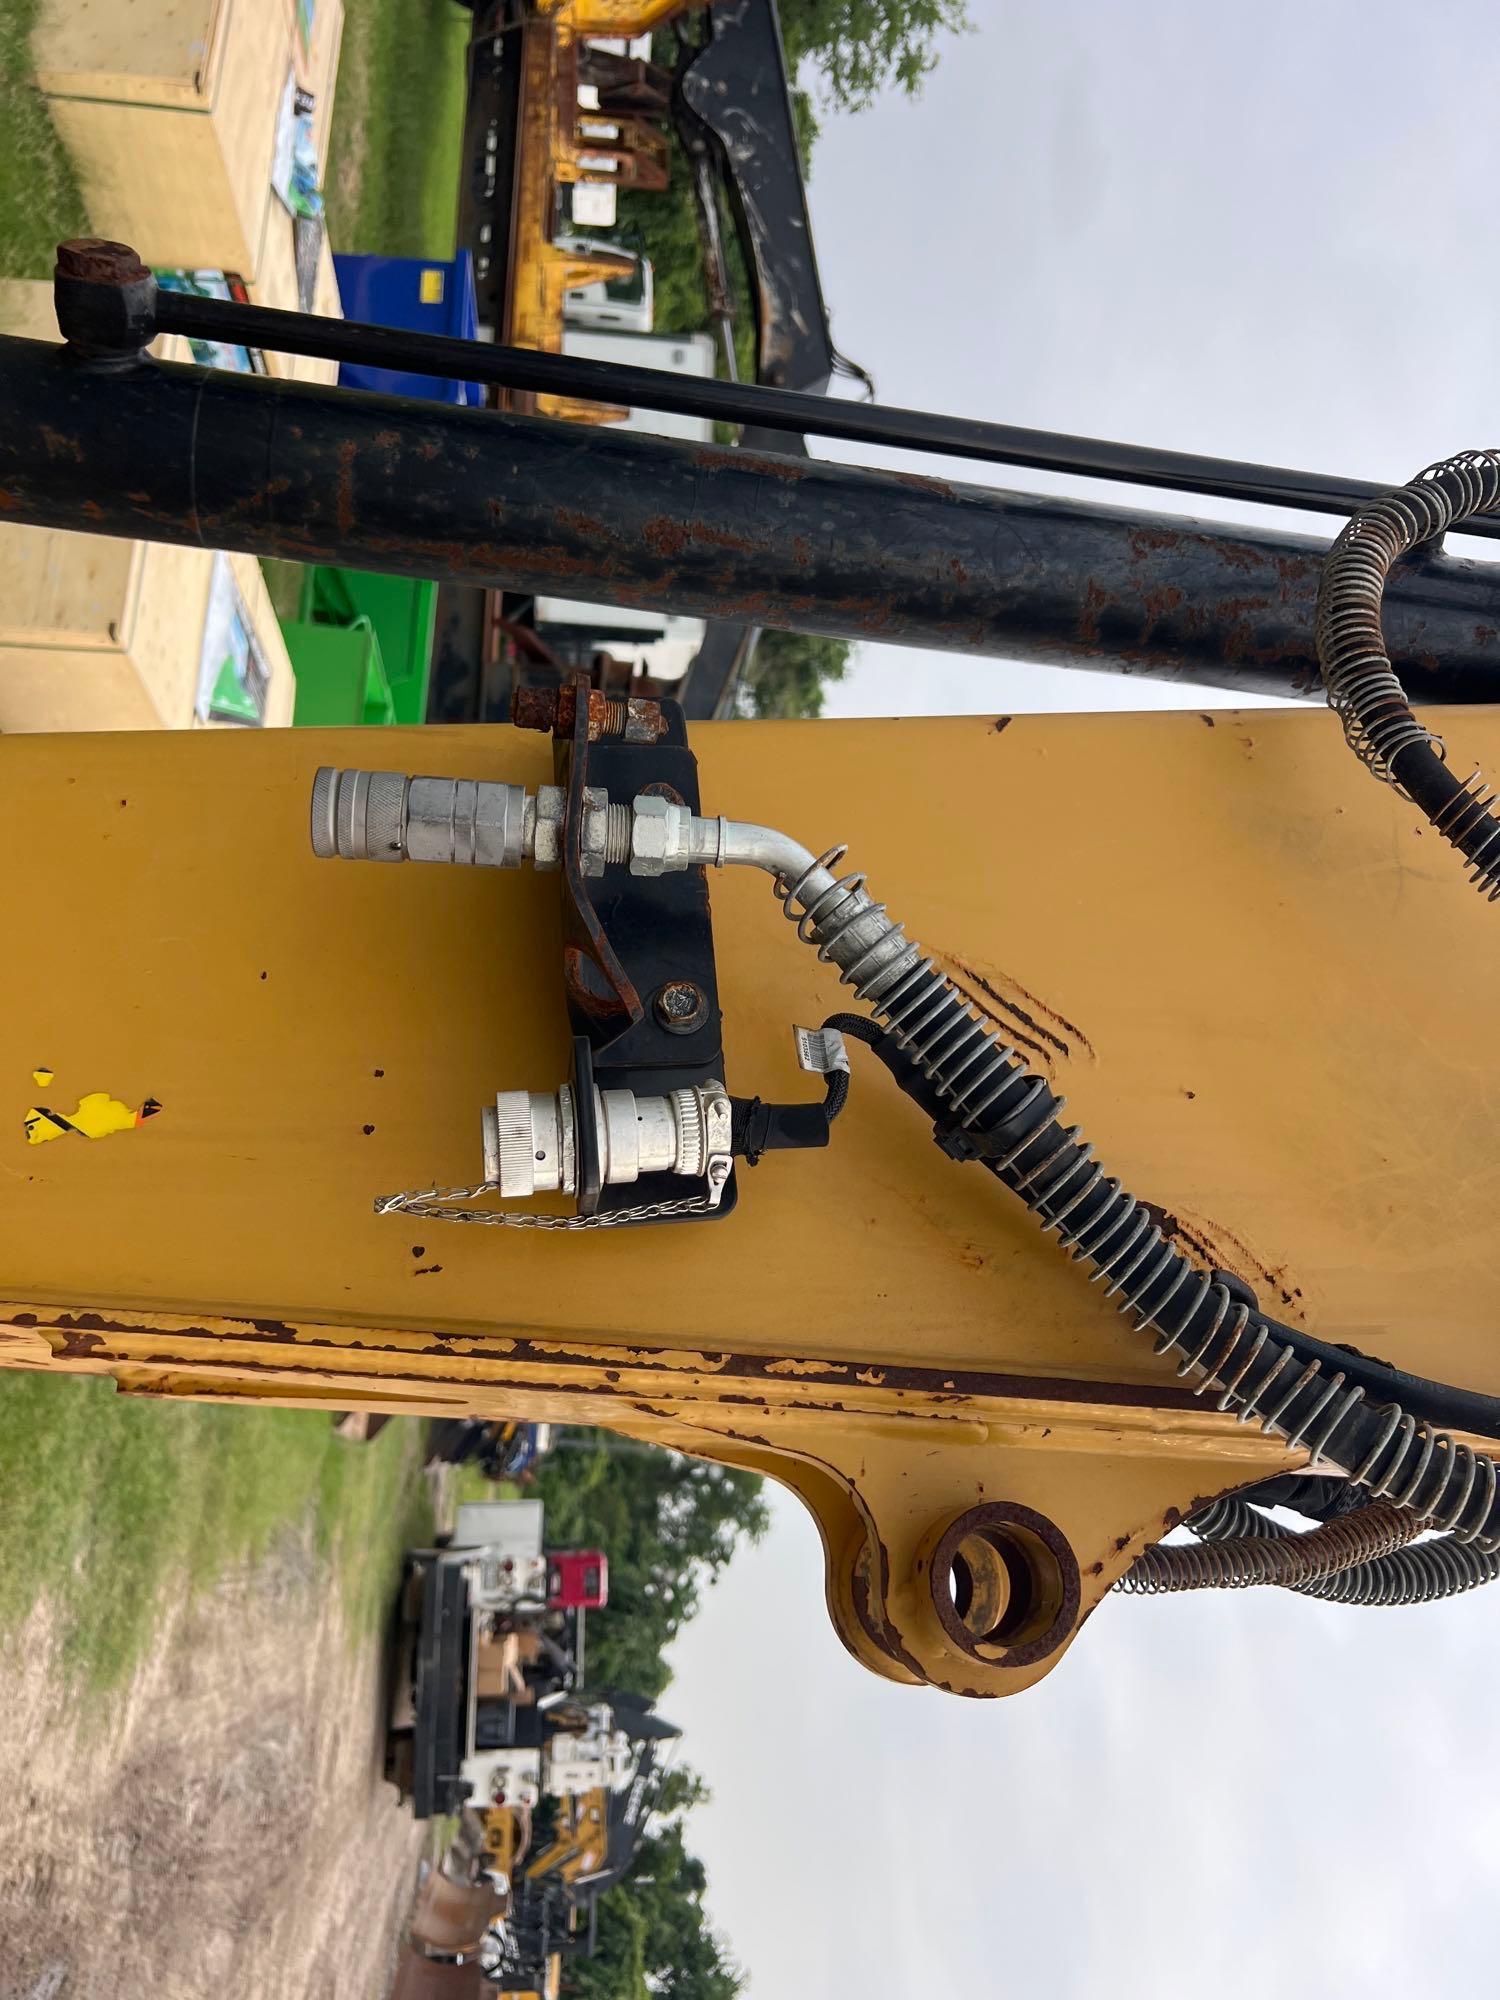 2016 CAT 308ECR HYDRAULIC EXCAVATOR SN:FJX06230 powered by Cat diesel engine, equipped with Cab,